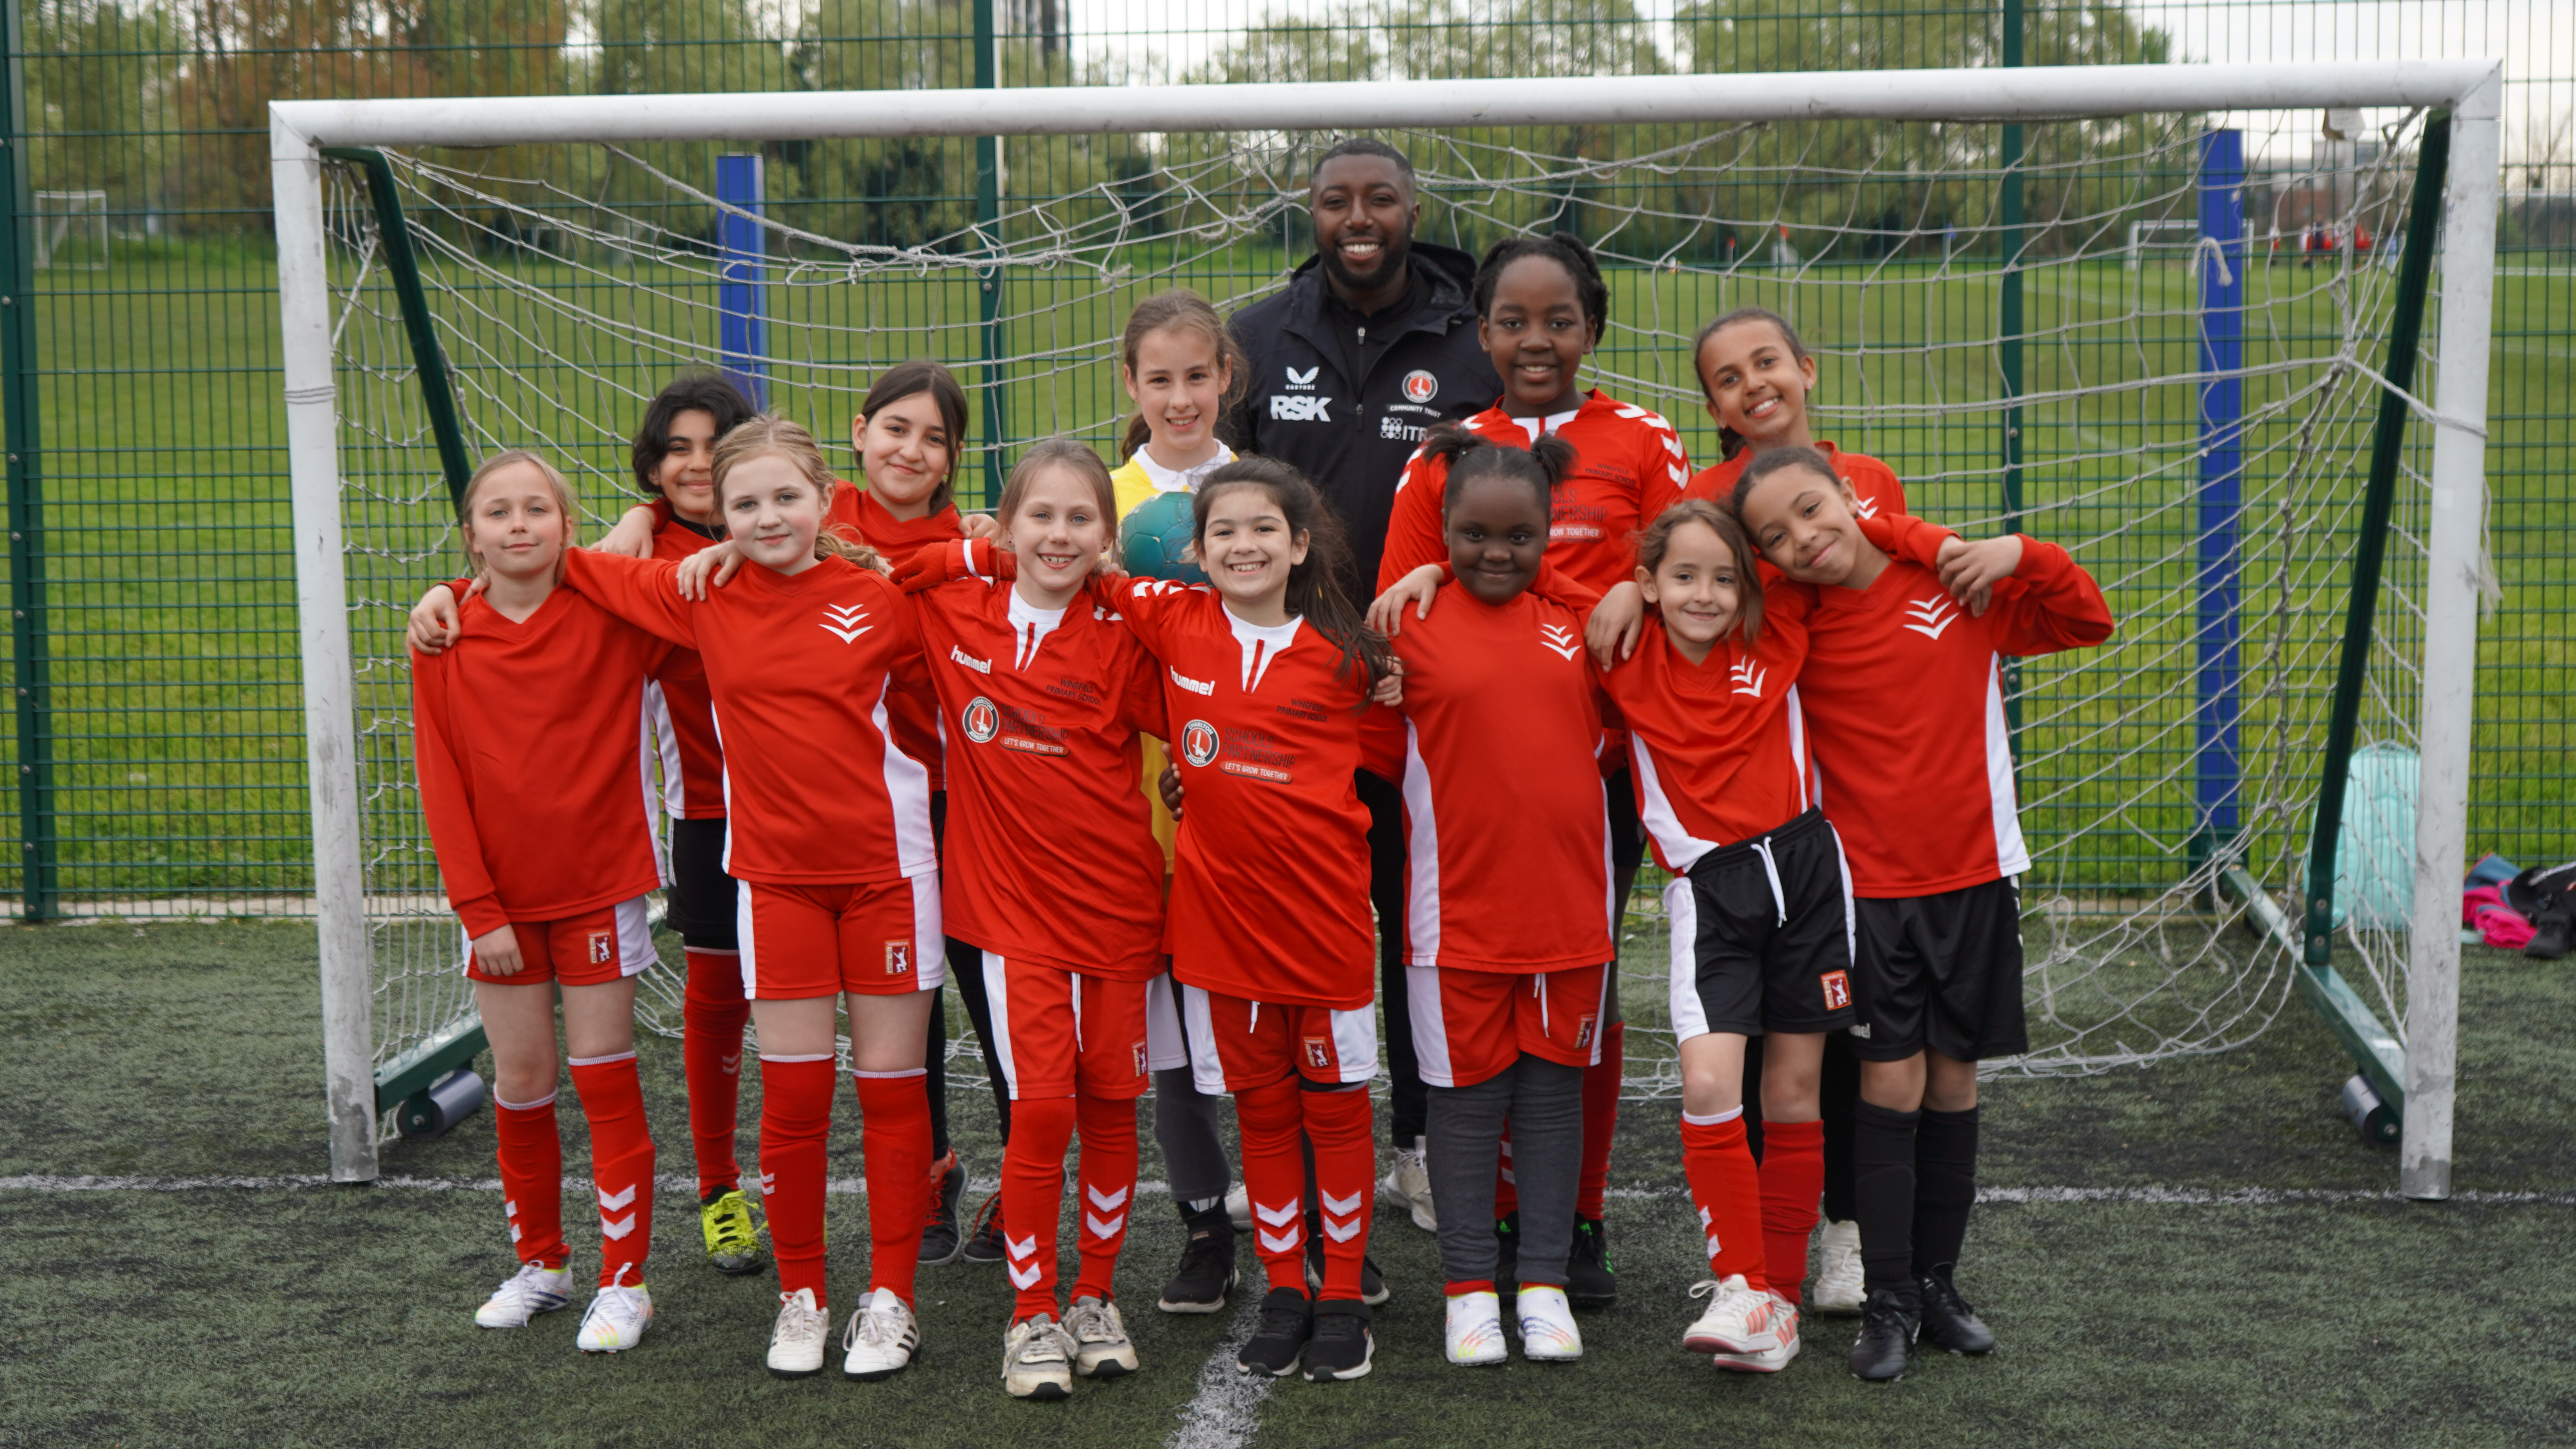 Girls football team in Charlton kits with CACT Coach Ivan posing inside a goal